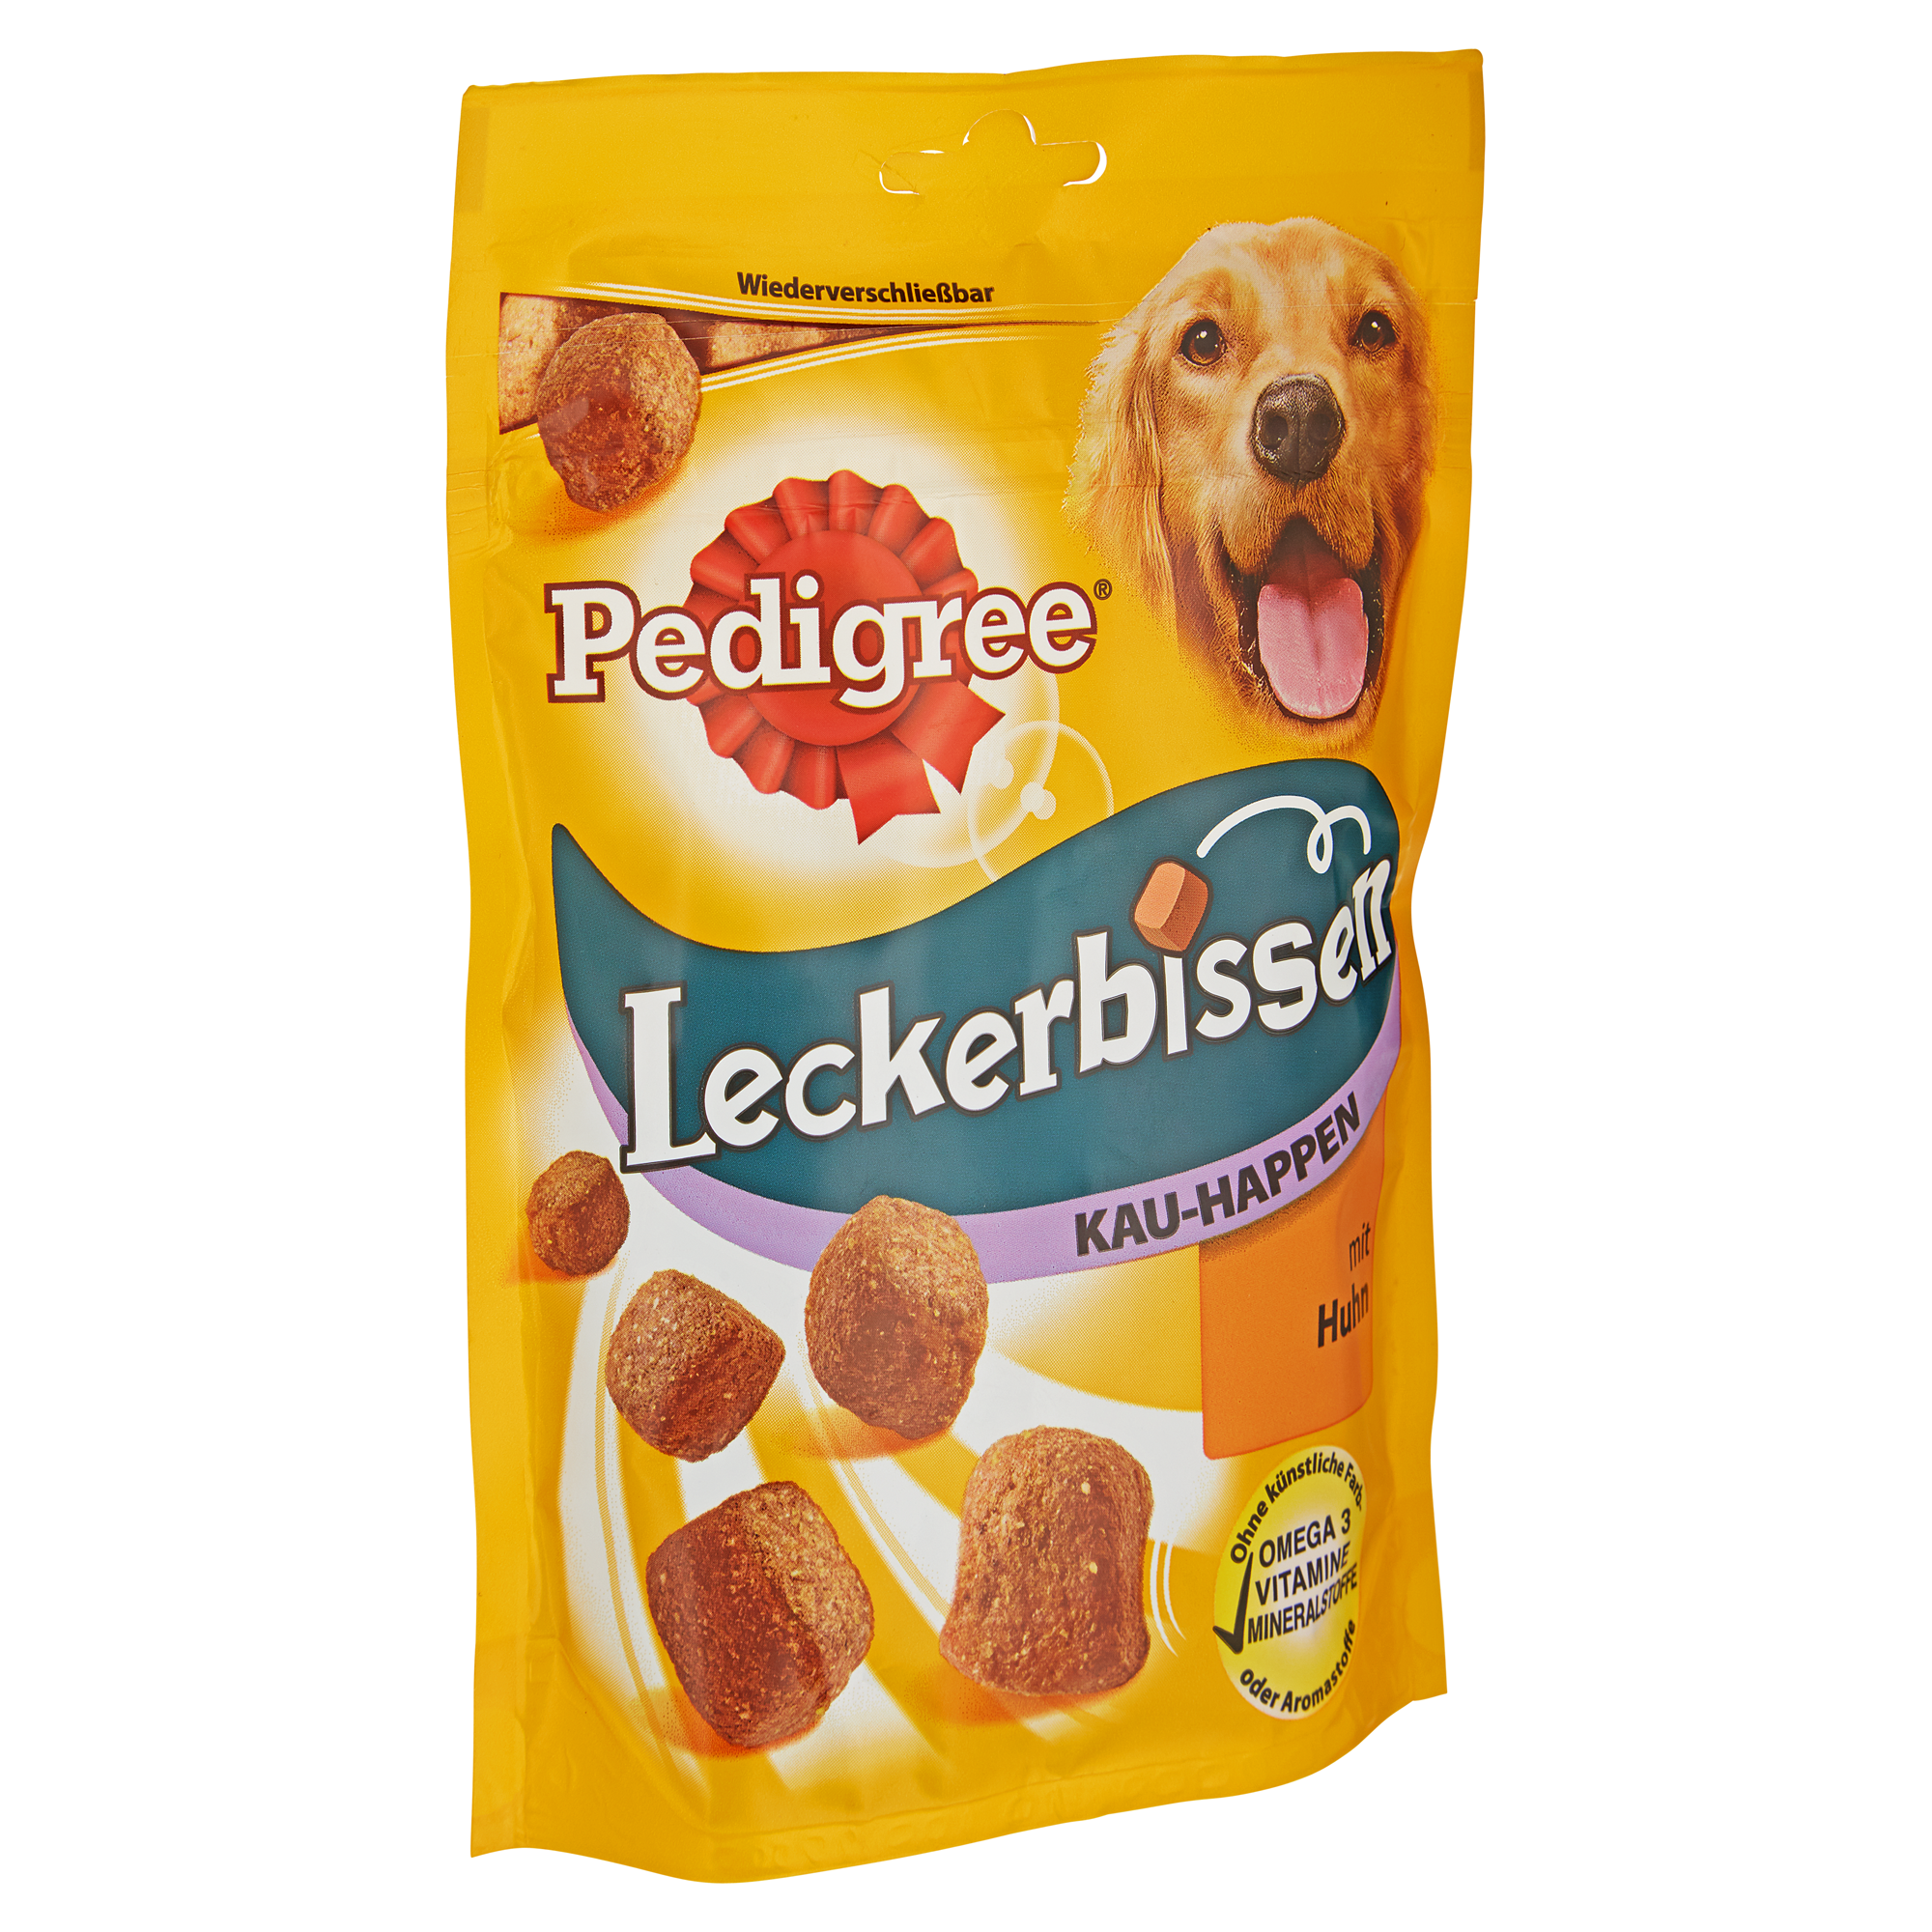 Hundesnack "Leckerbissen Kau-Happen" mit Huhn 130 g + product picture